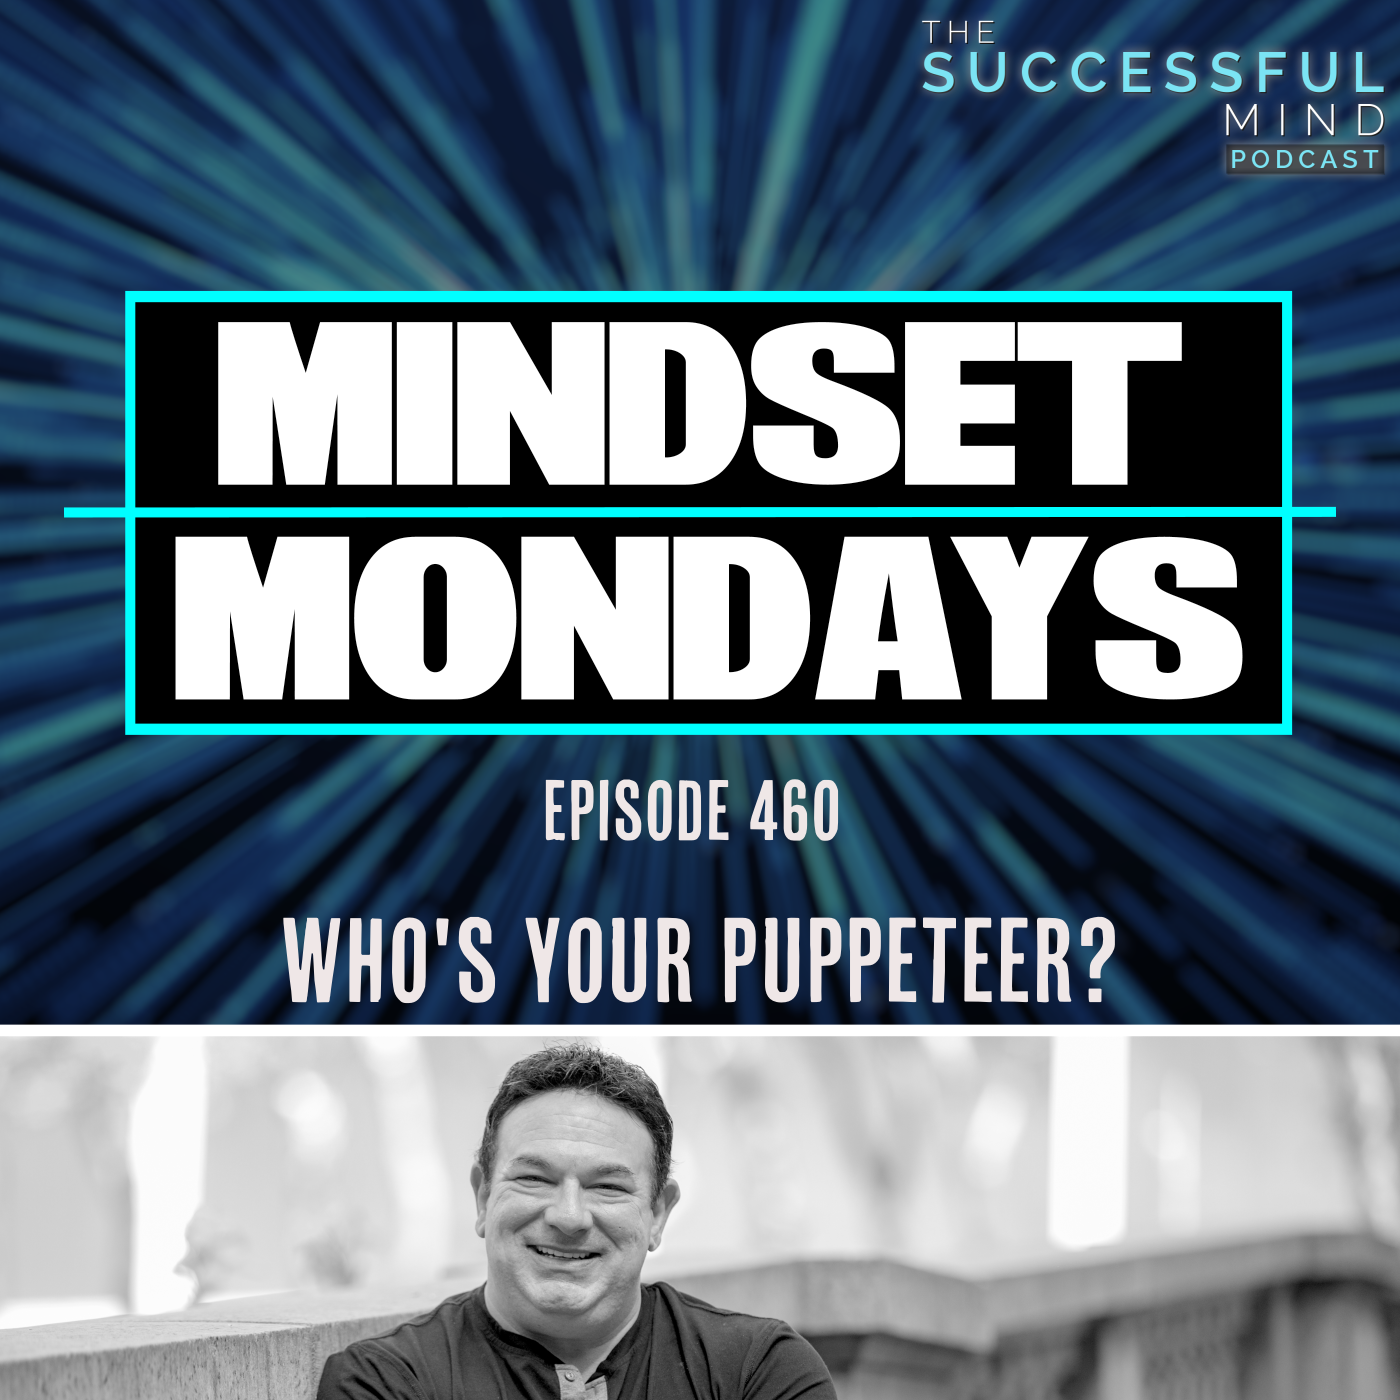 The Successful Mind Podcast - Episode 460 - Who's Your Puppeteer?